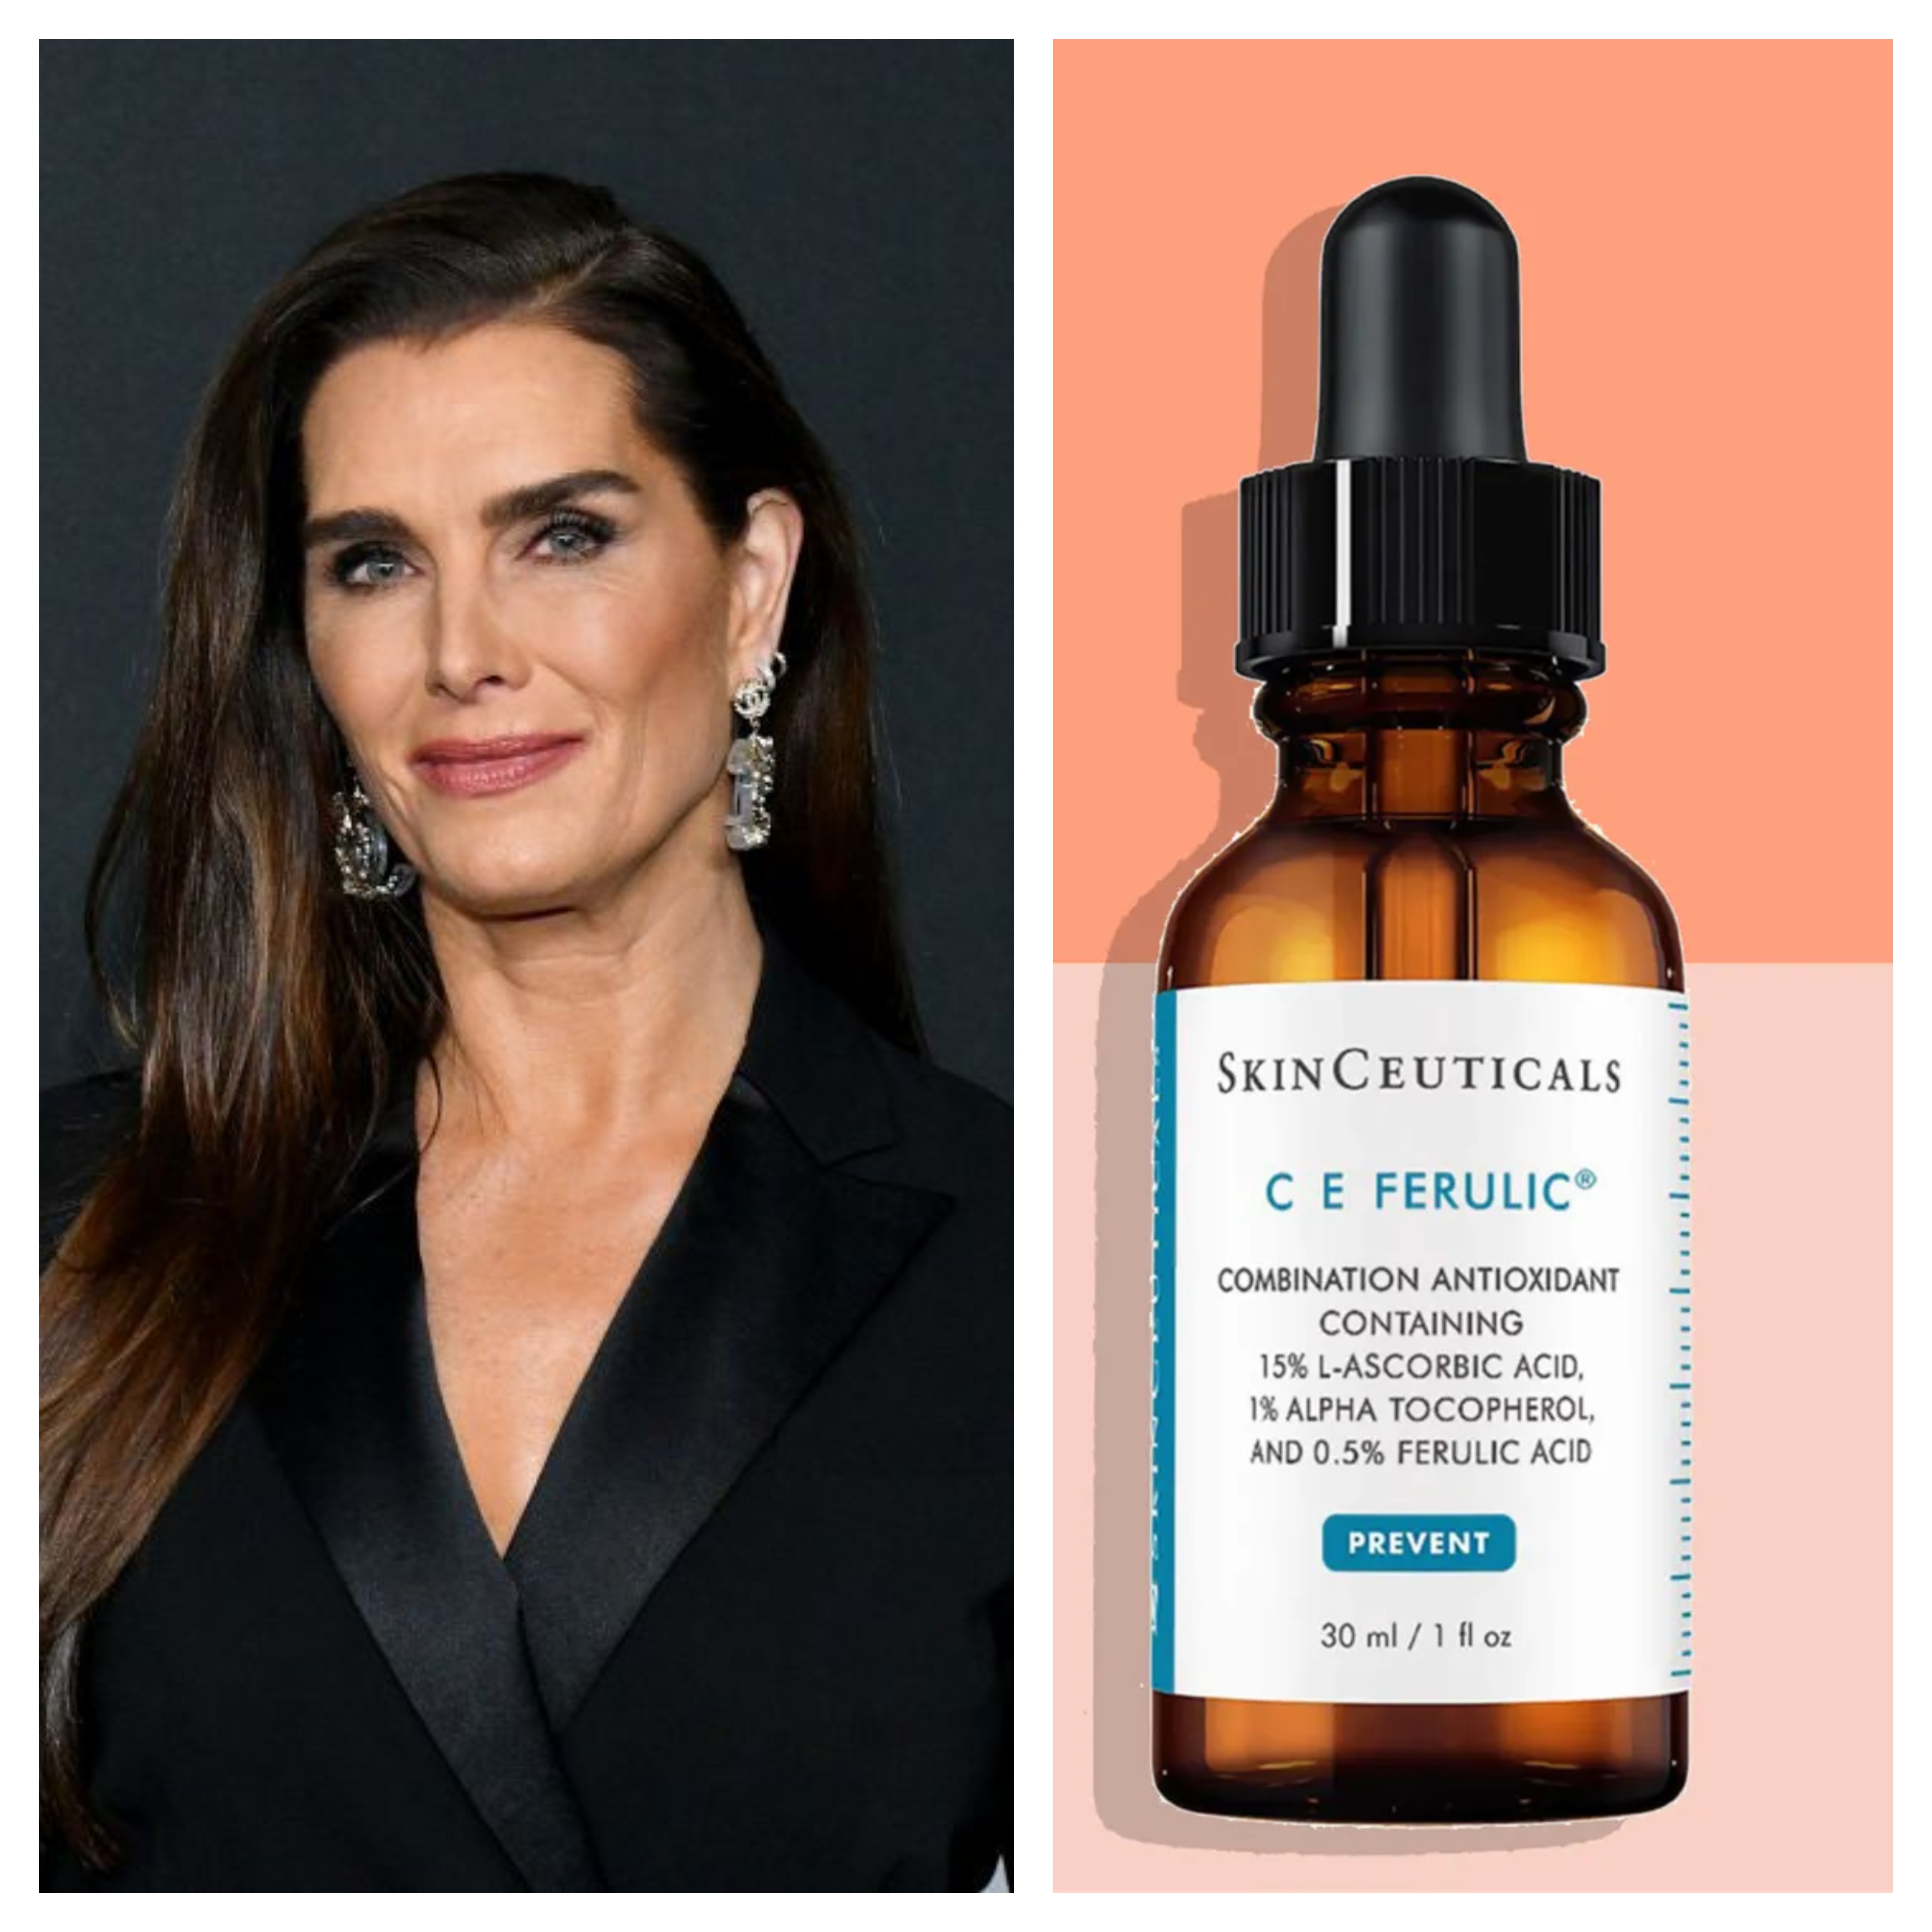 Collage of Brooke Shields and SkinCeuticals C E Ferulic